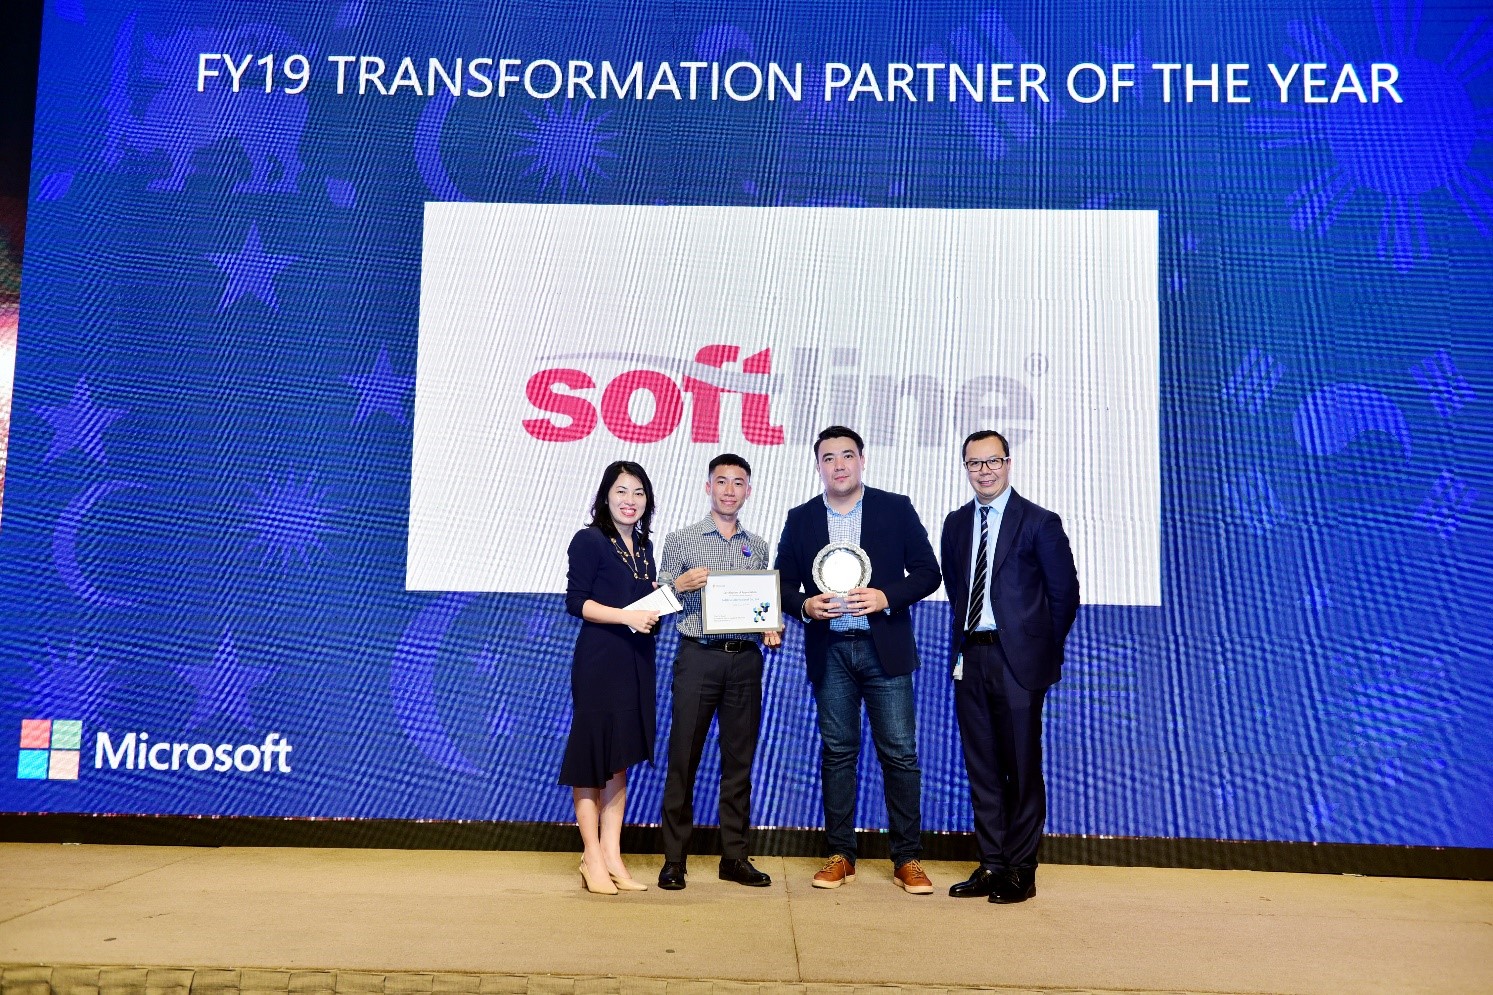 FY19 Transformation Partner of the Year